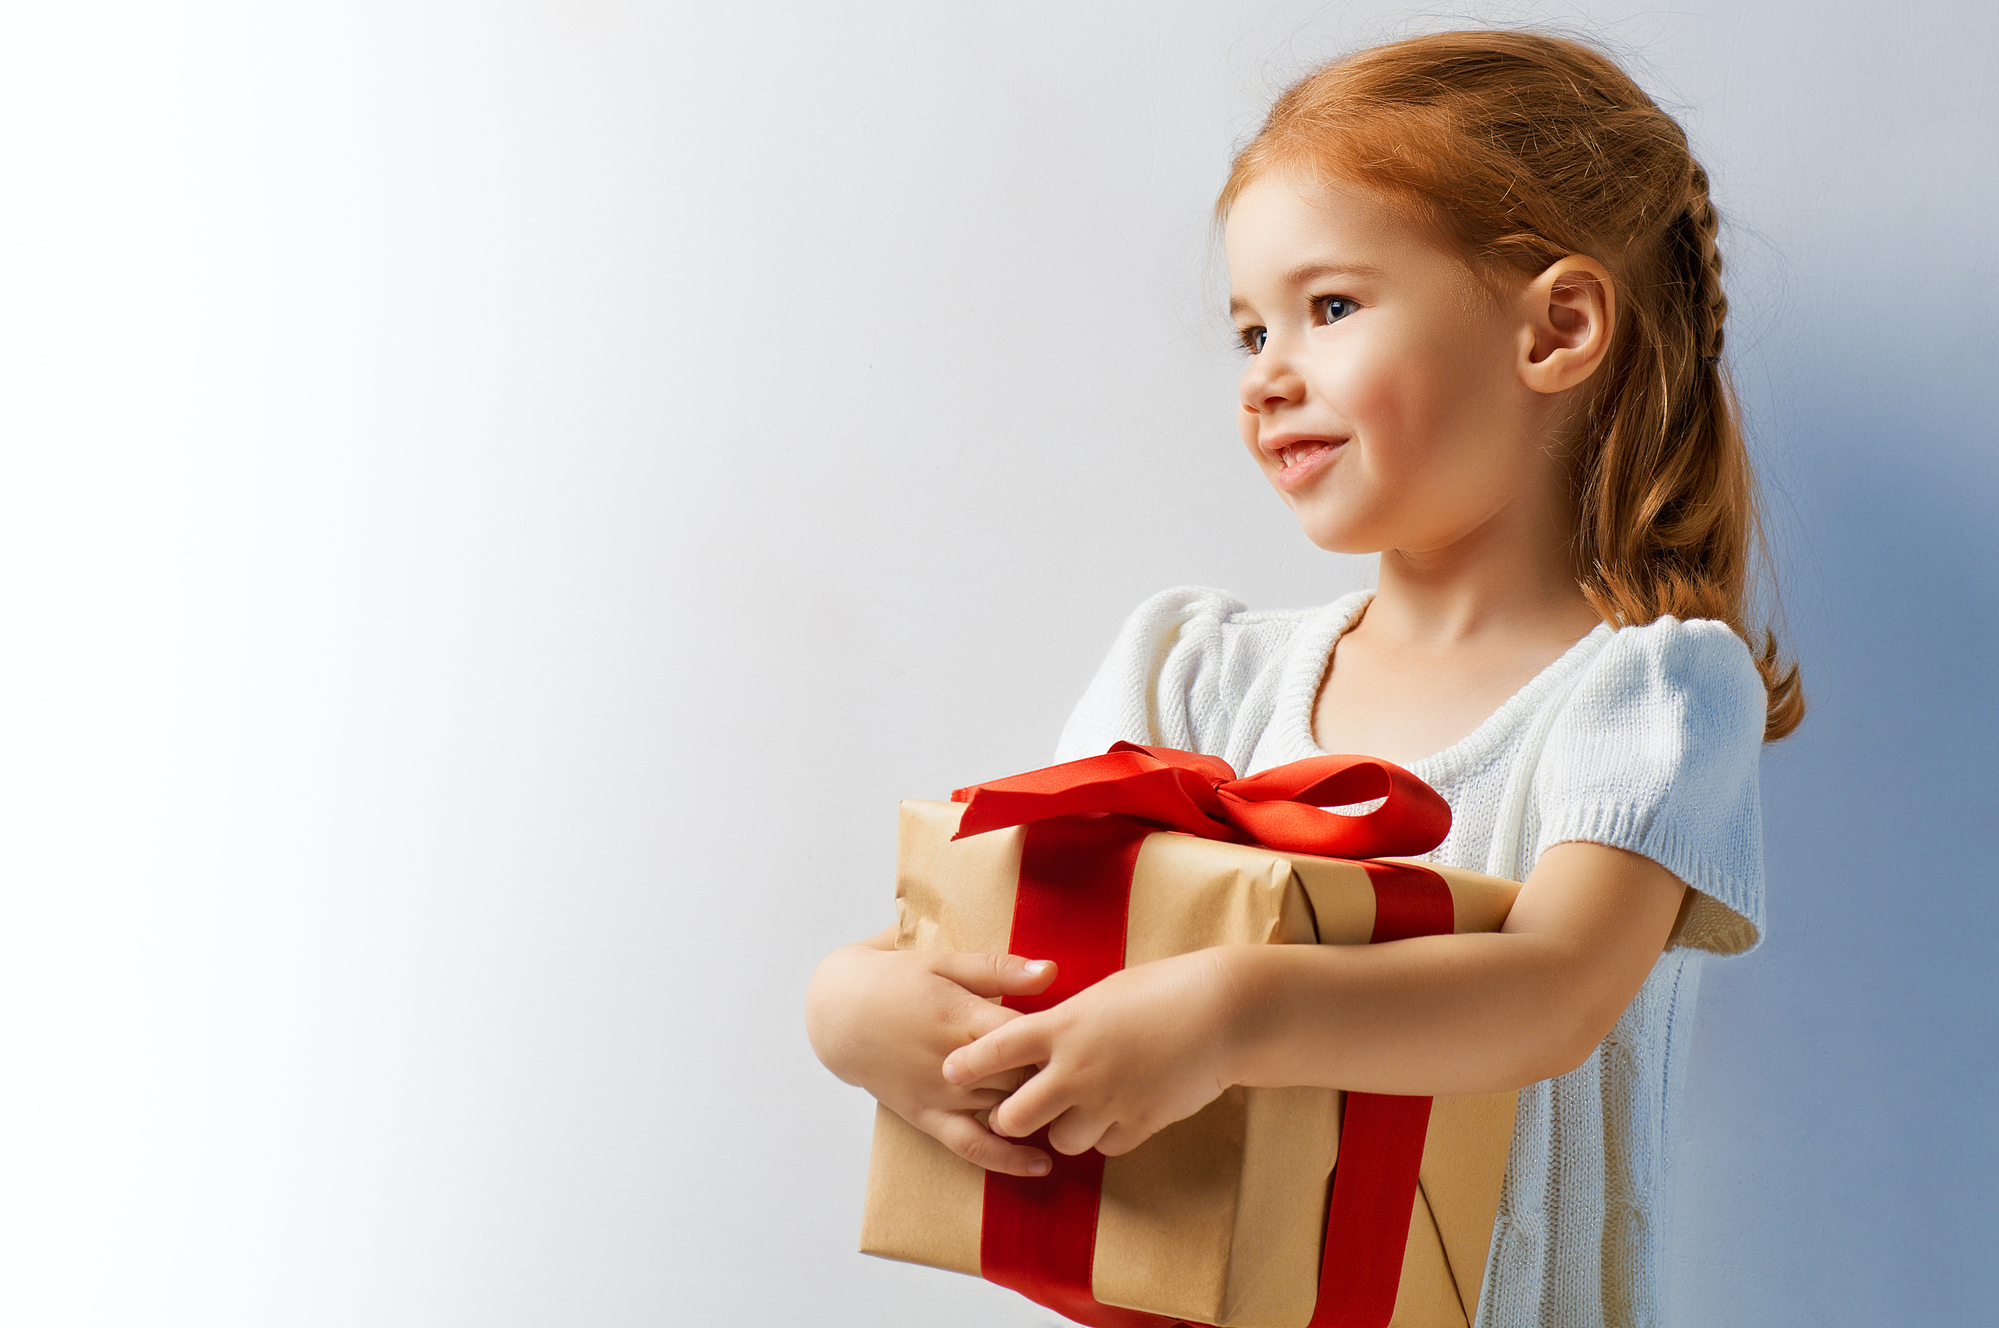 How to Find the Perfect Gift for Your Child